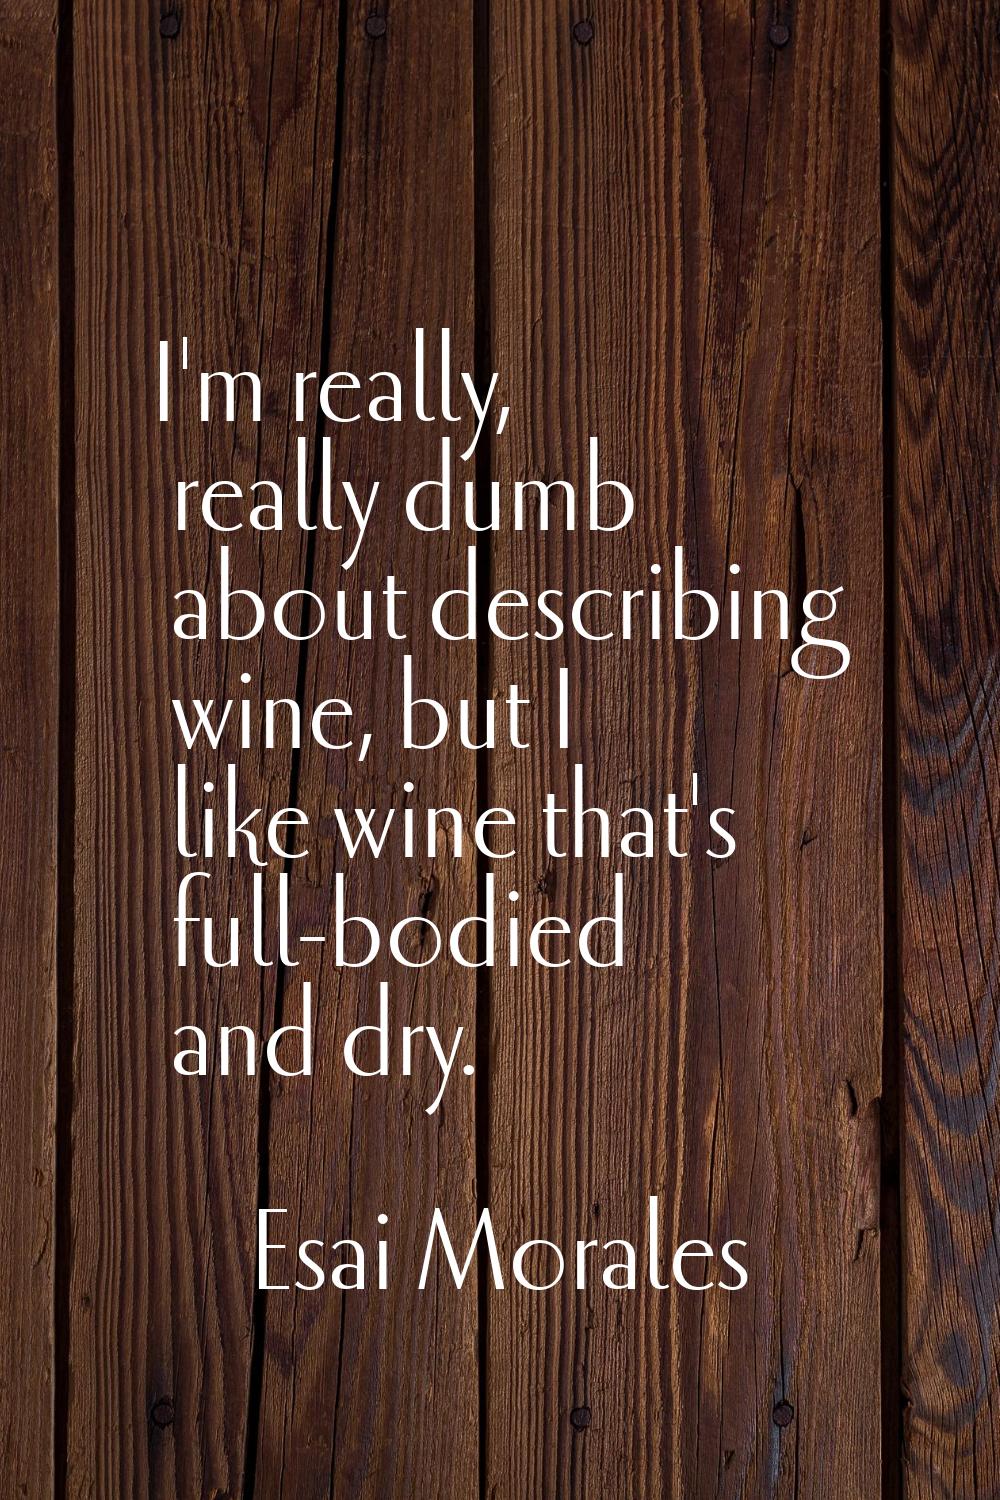 I'm really, really dumb about describing wine, but I like wine that's full-bodied and dry.